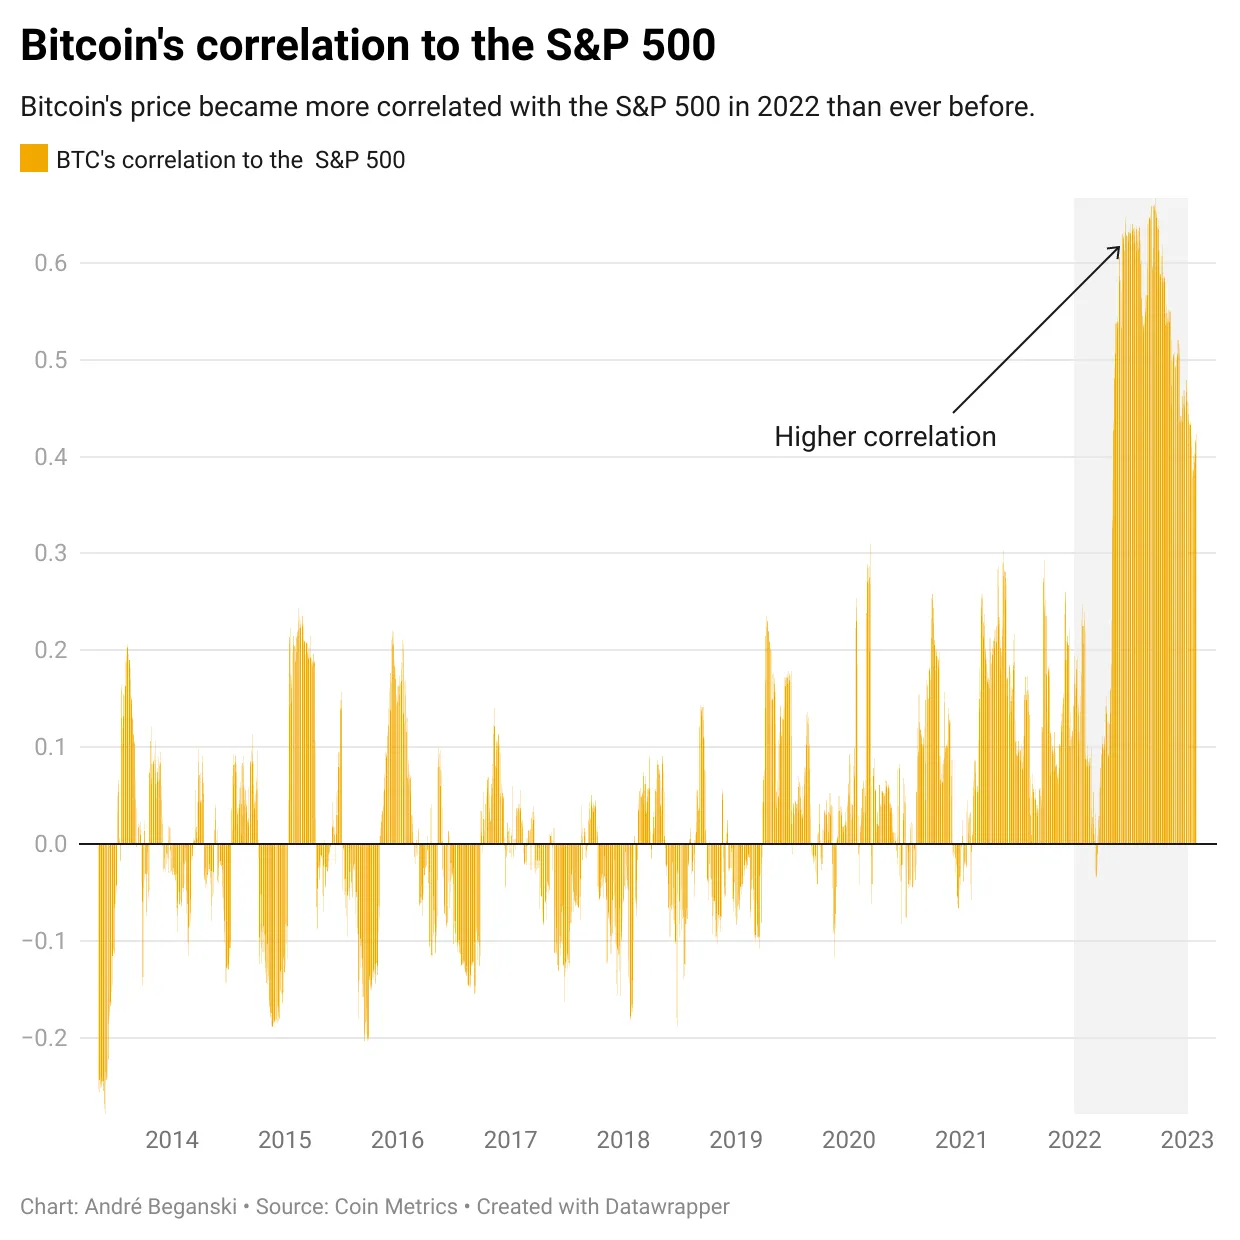 Bitcoin's price became more correlated with the S&P 500 in 2022 than ever before. 